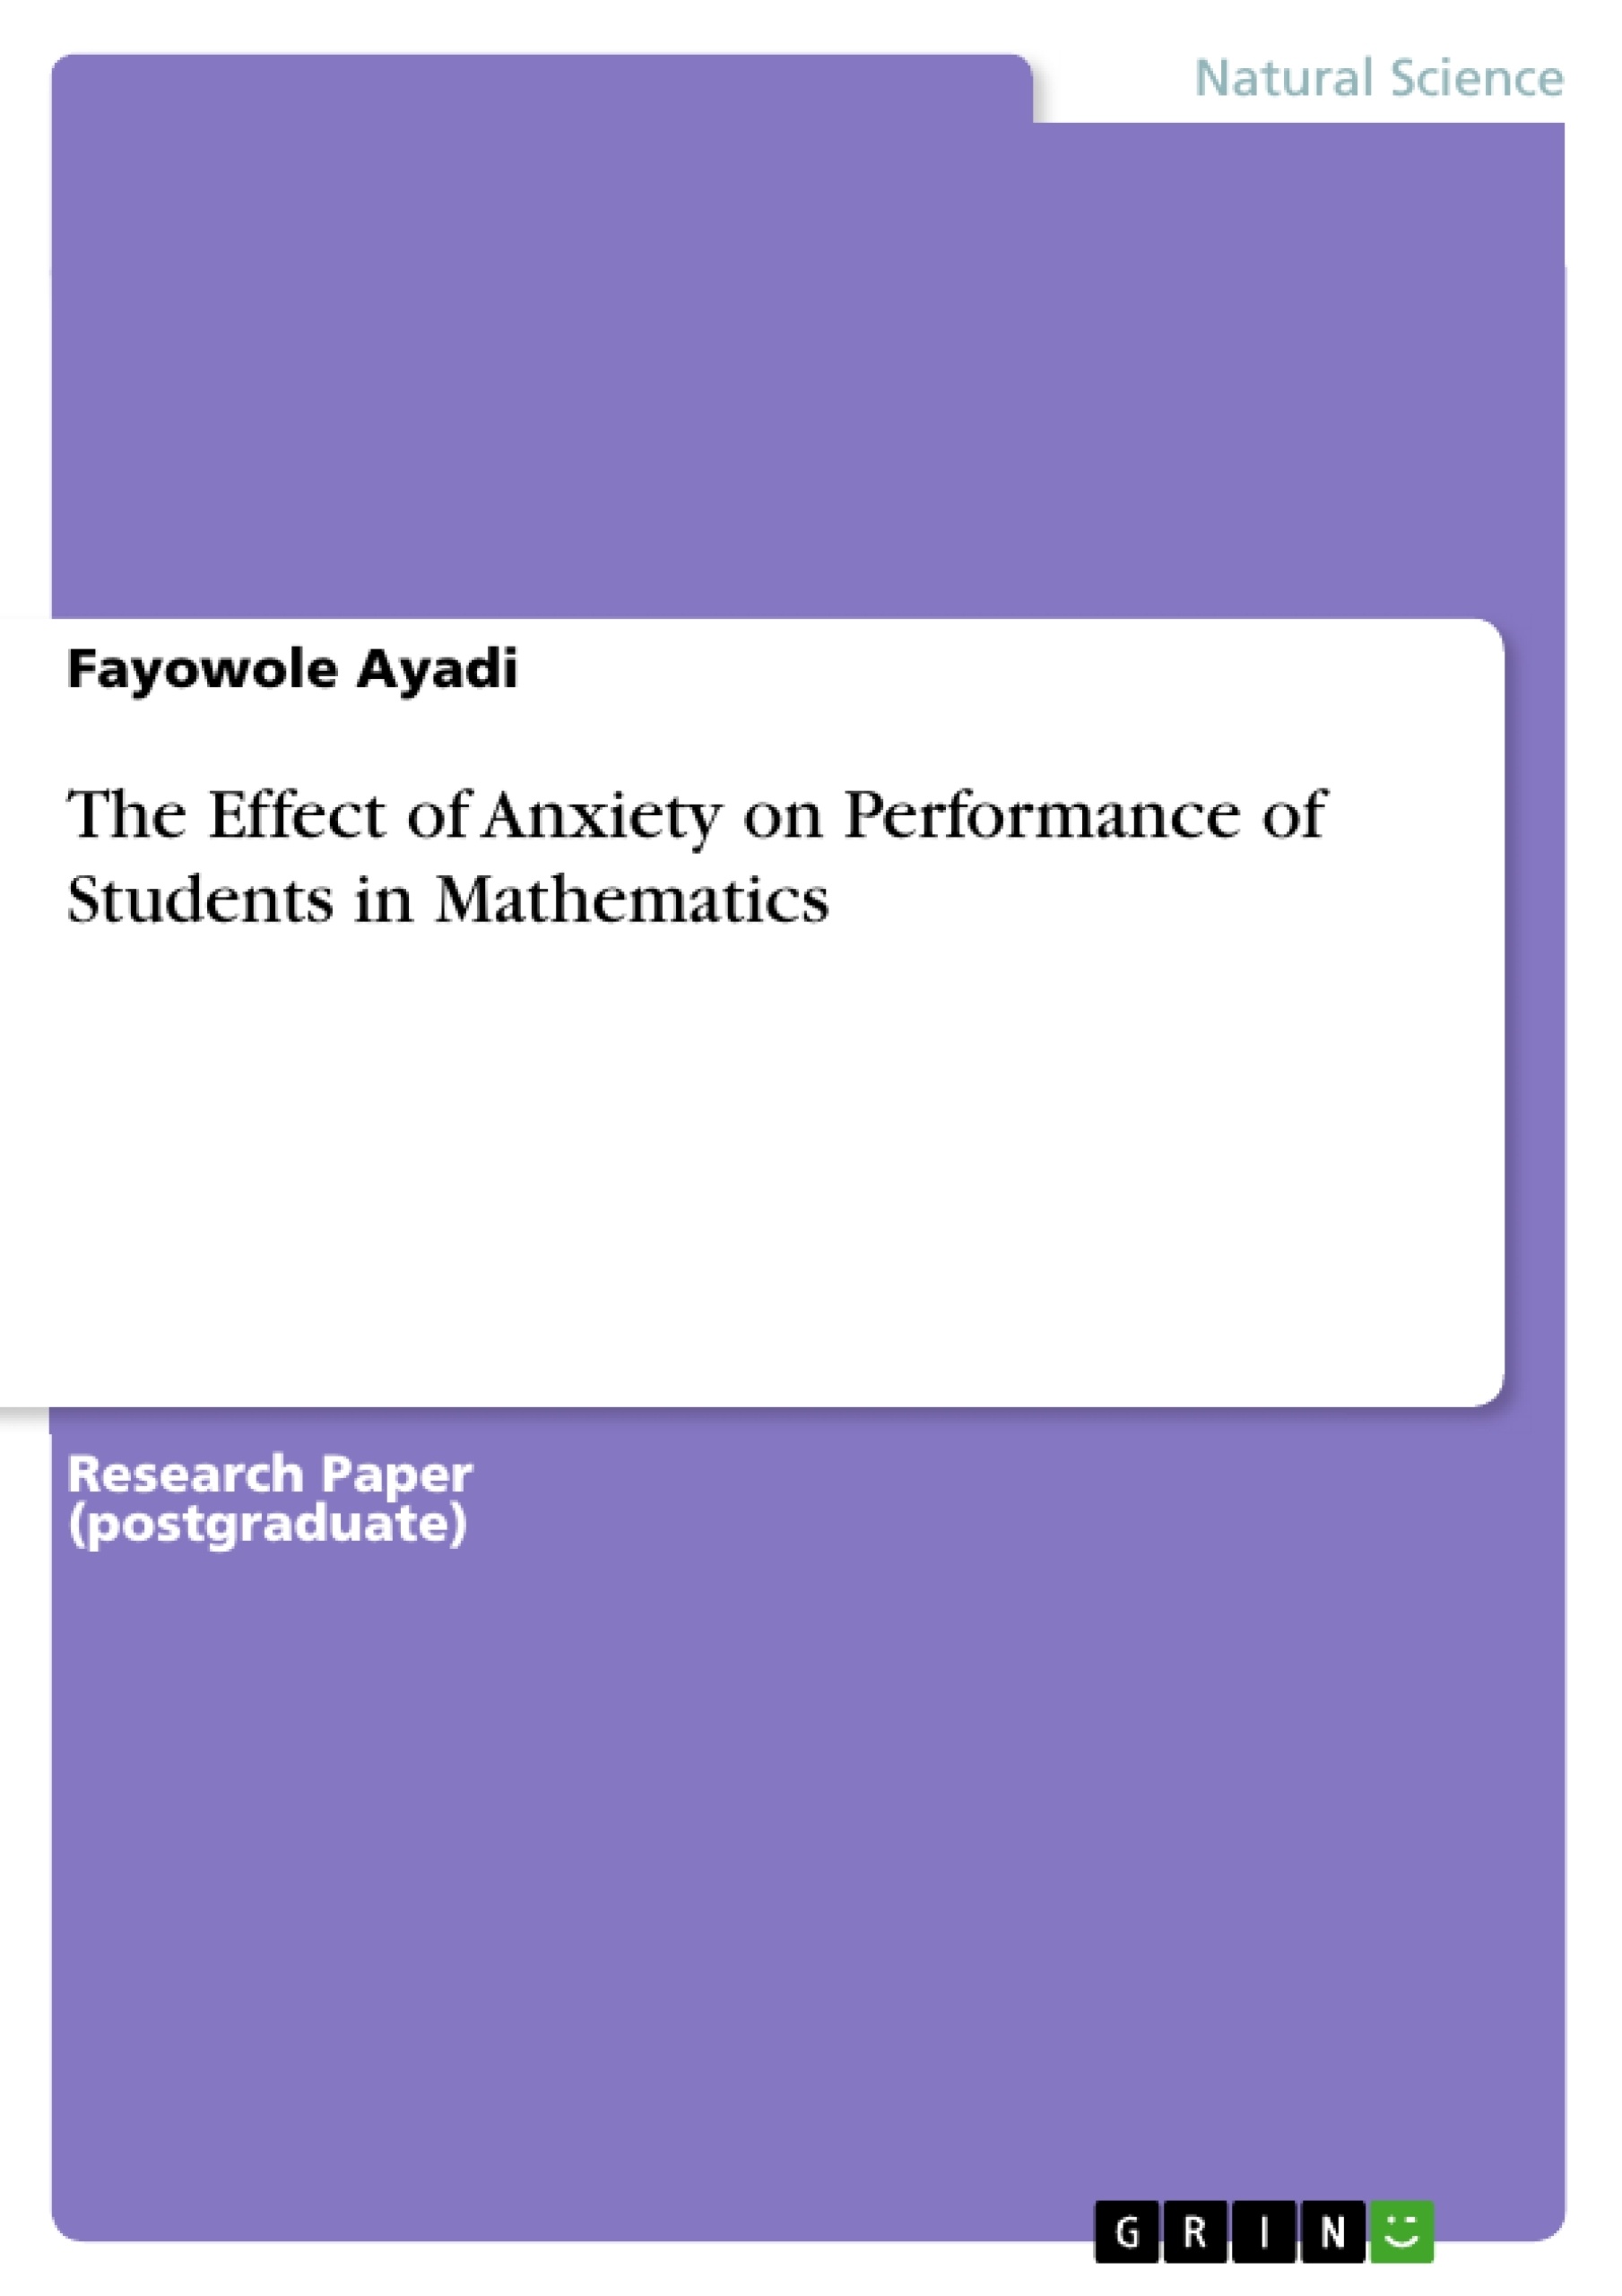 Titre: The Effect of Anxiety on Performance of Students in Mathematics